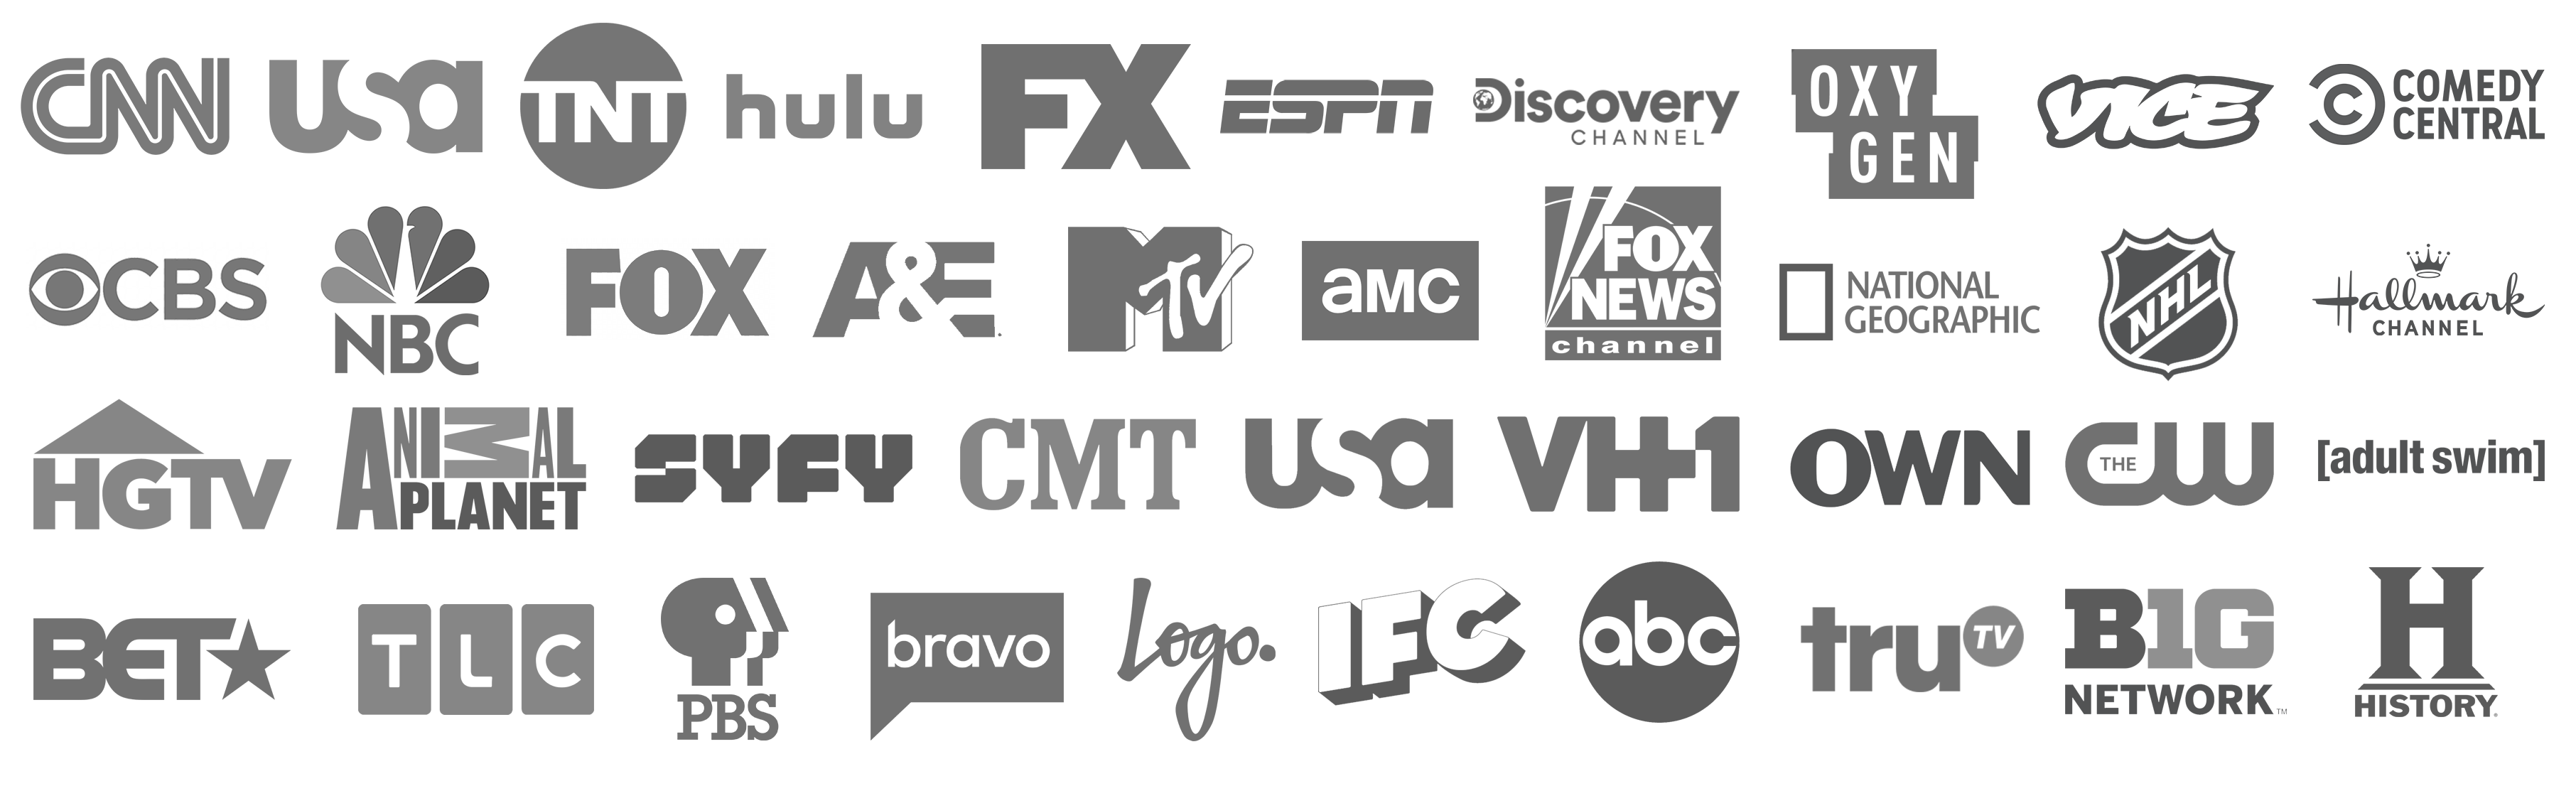 Connected TV Channel Logos